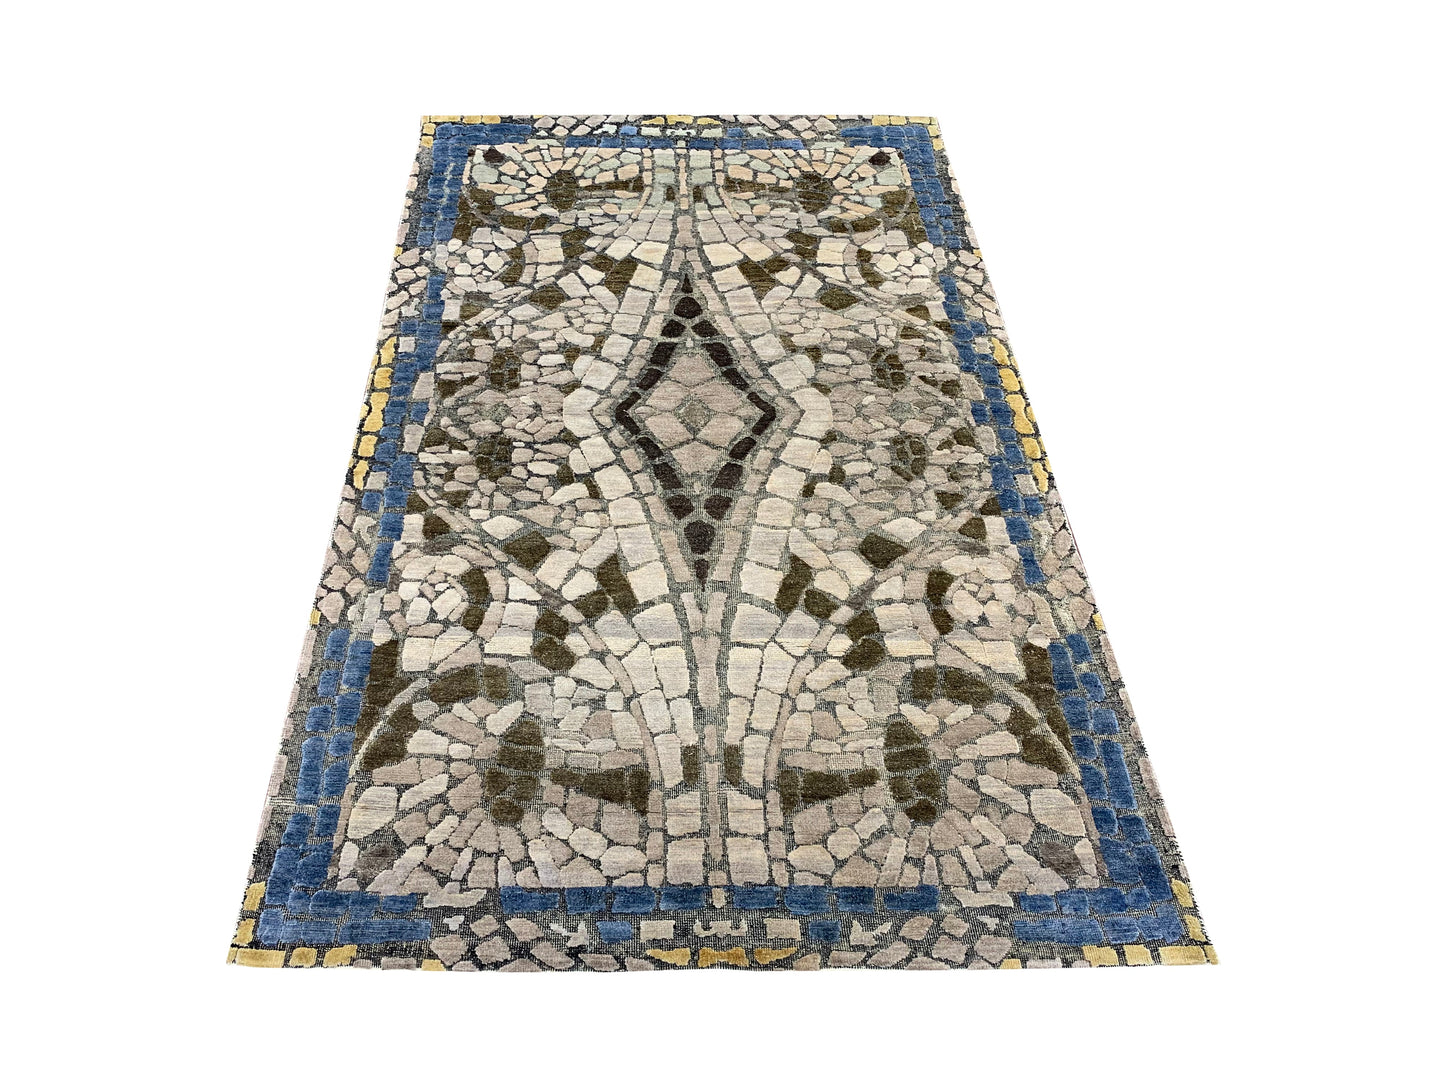 Get trendy with Grey Multi Silk Wool Modern Handknotted Area Rug 3.11x6.4Ft 120x193Cms - Modern Rugs available at Jaipur Oriental Rugs. Grab yours for $1340.00 today!